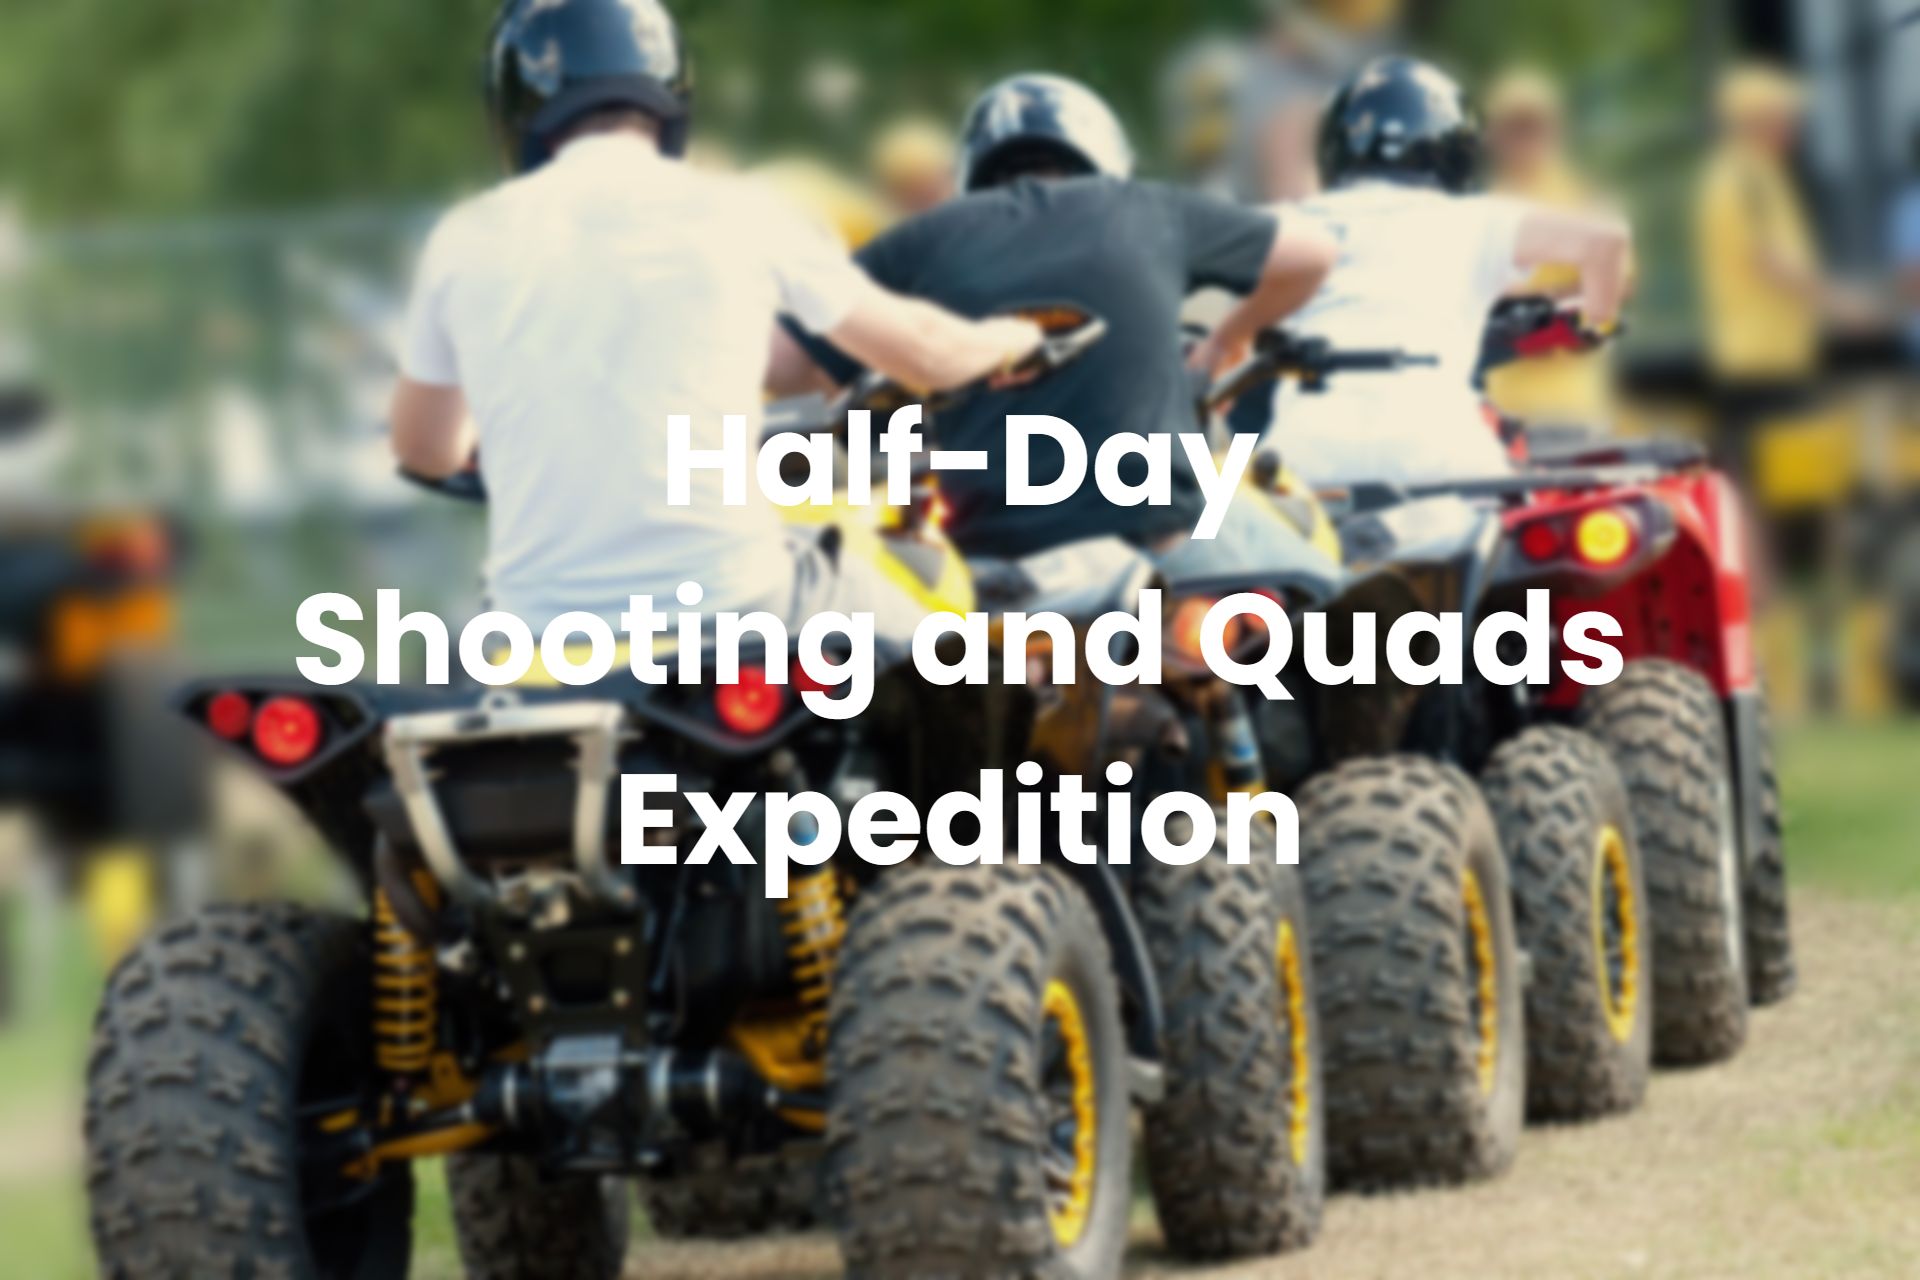 Half-Day Shooting and Quads Expedition